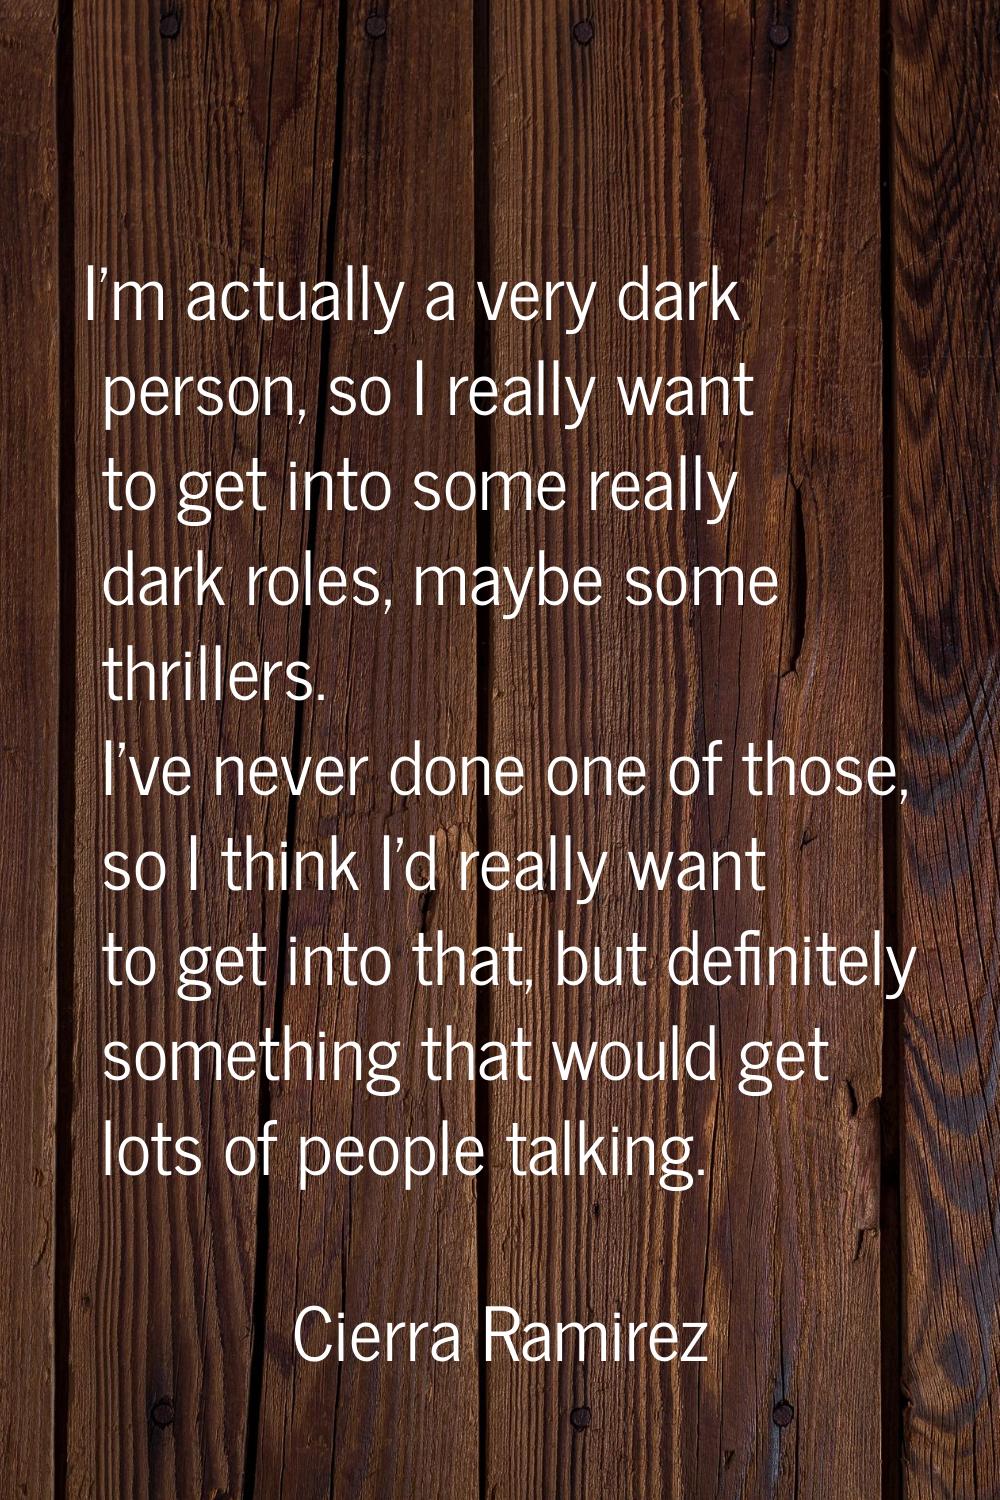 I'm actually a very dark person, so I really want to get into some really dark roles, maybe some th